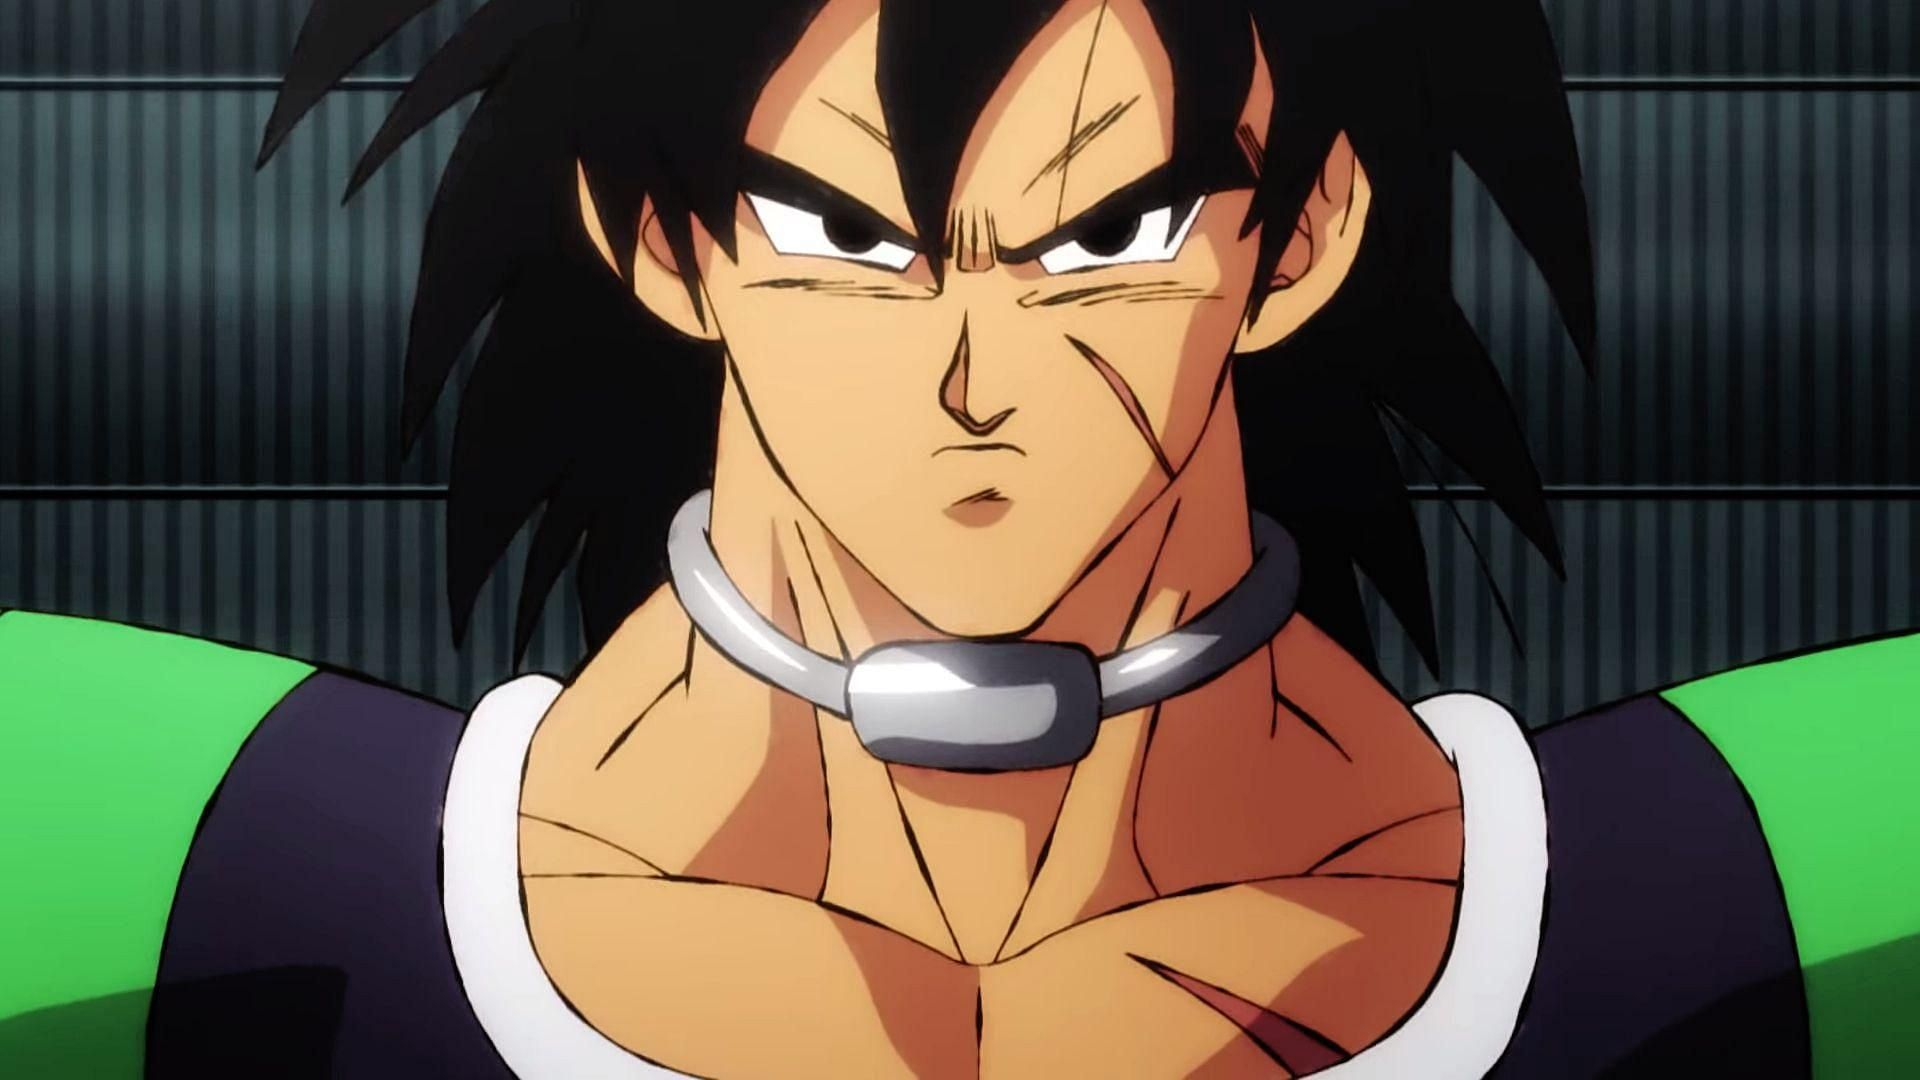 Broly as seen in Dragon Ball Super: Broly